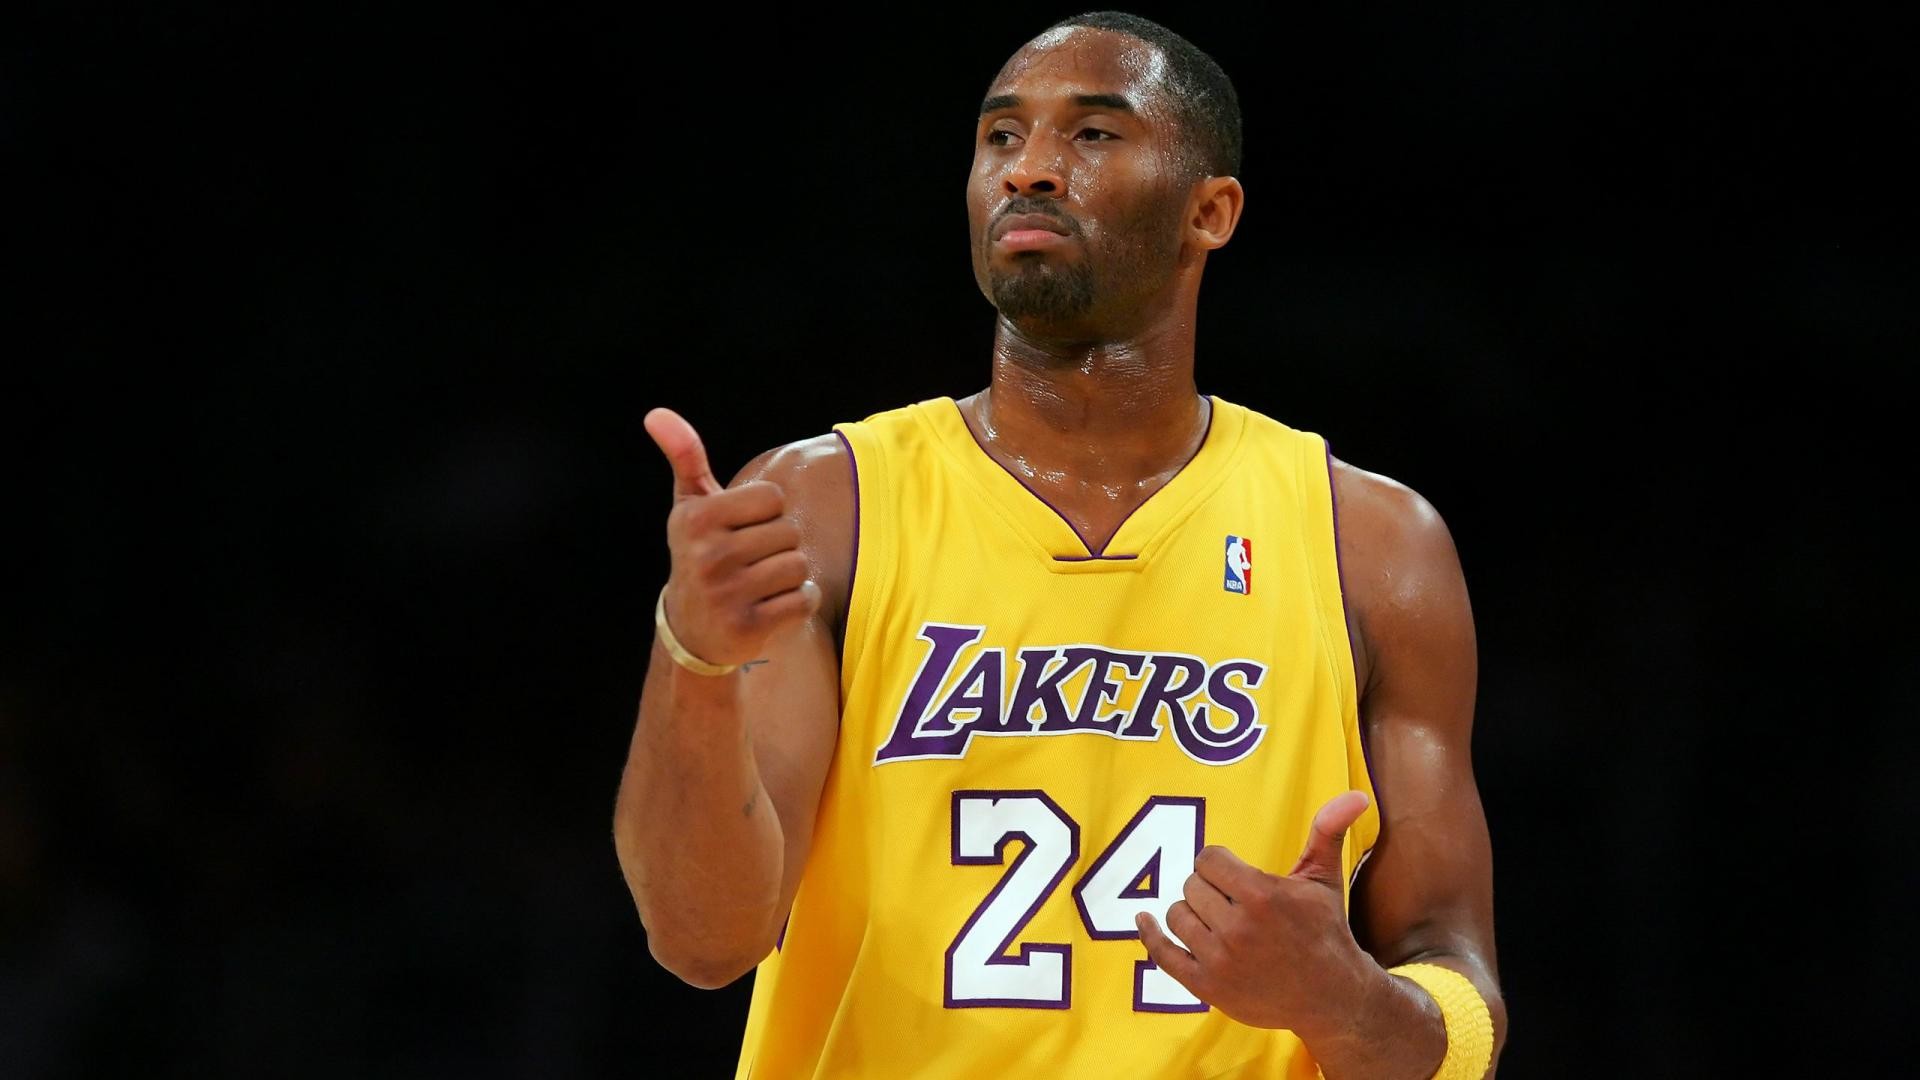 1920x1080 Number 24 Lakers Photo Picture Image 2013 HD Wallpaper Widescreen .